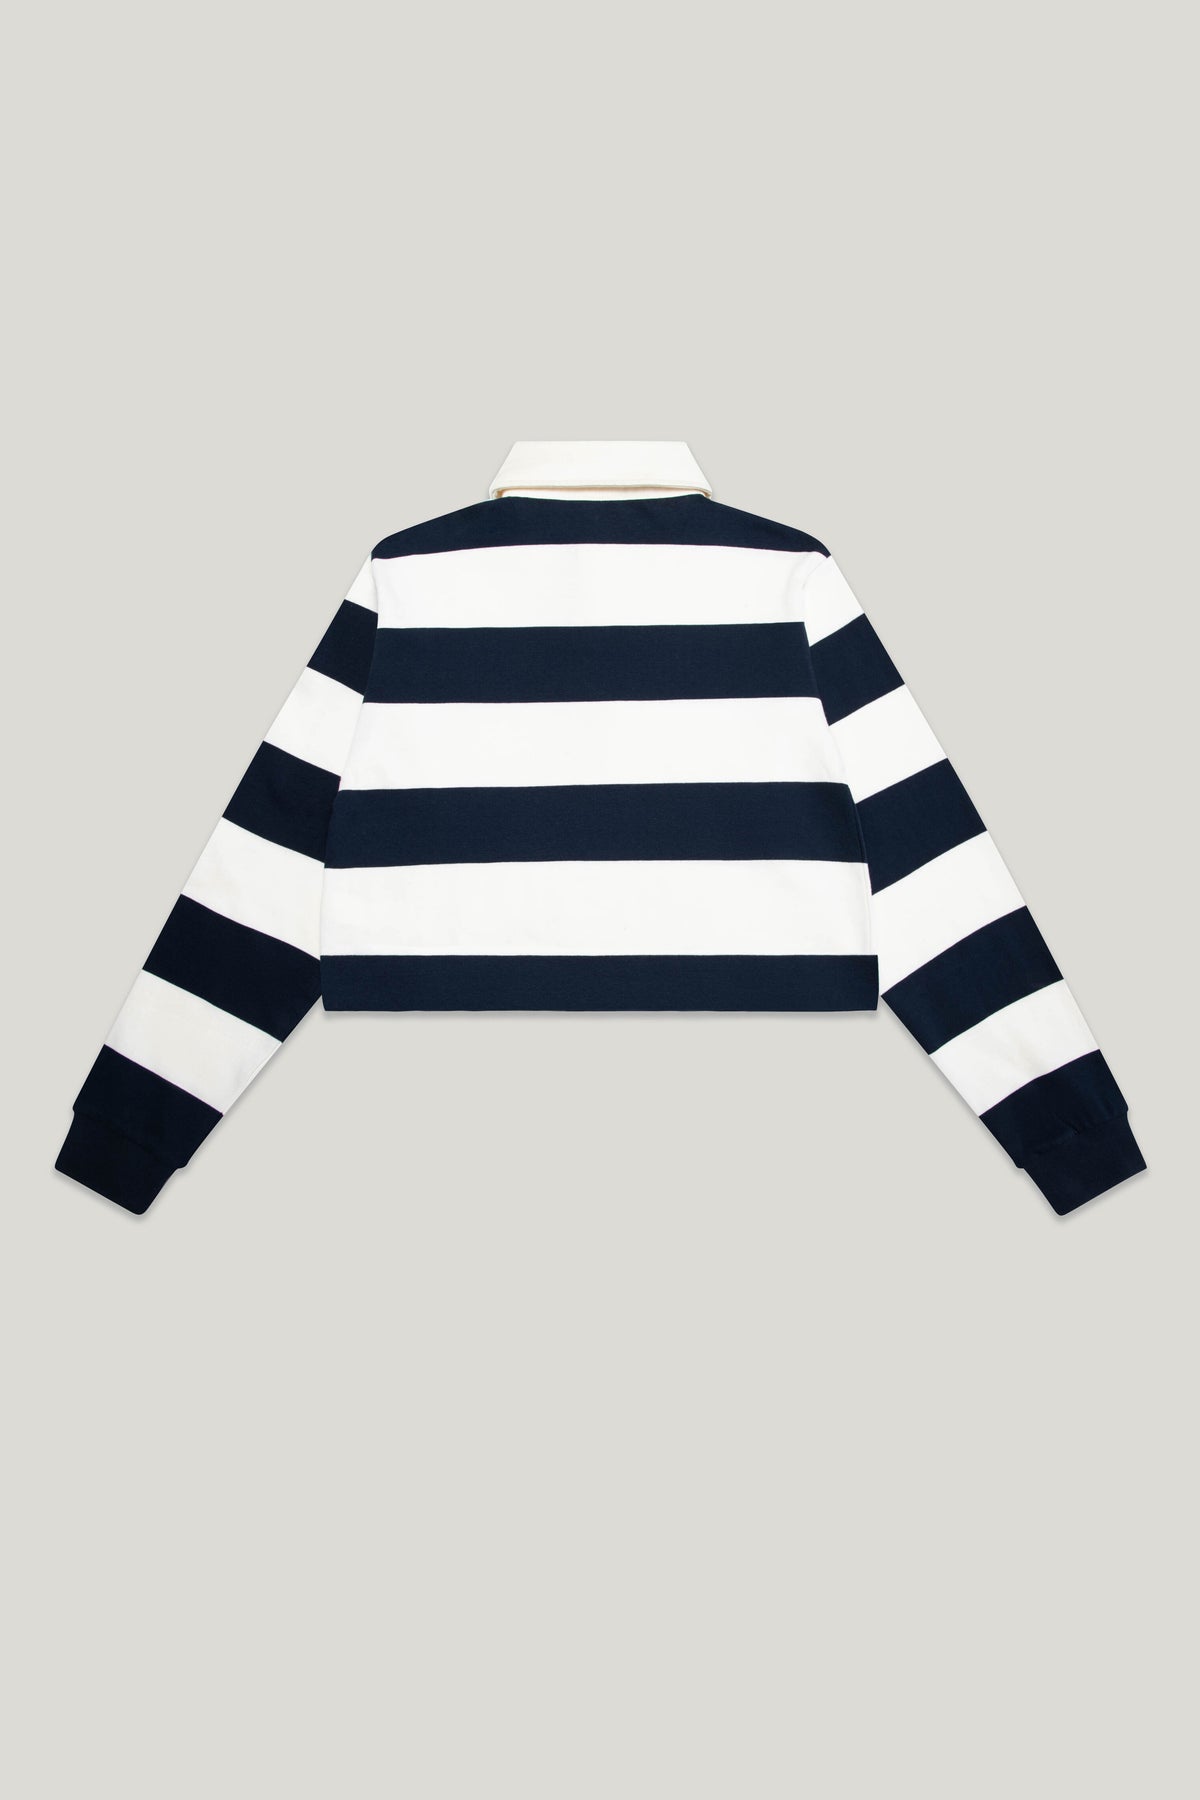 Penn State Rugby Top